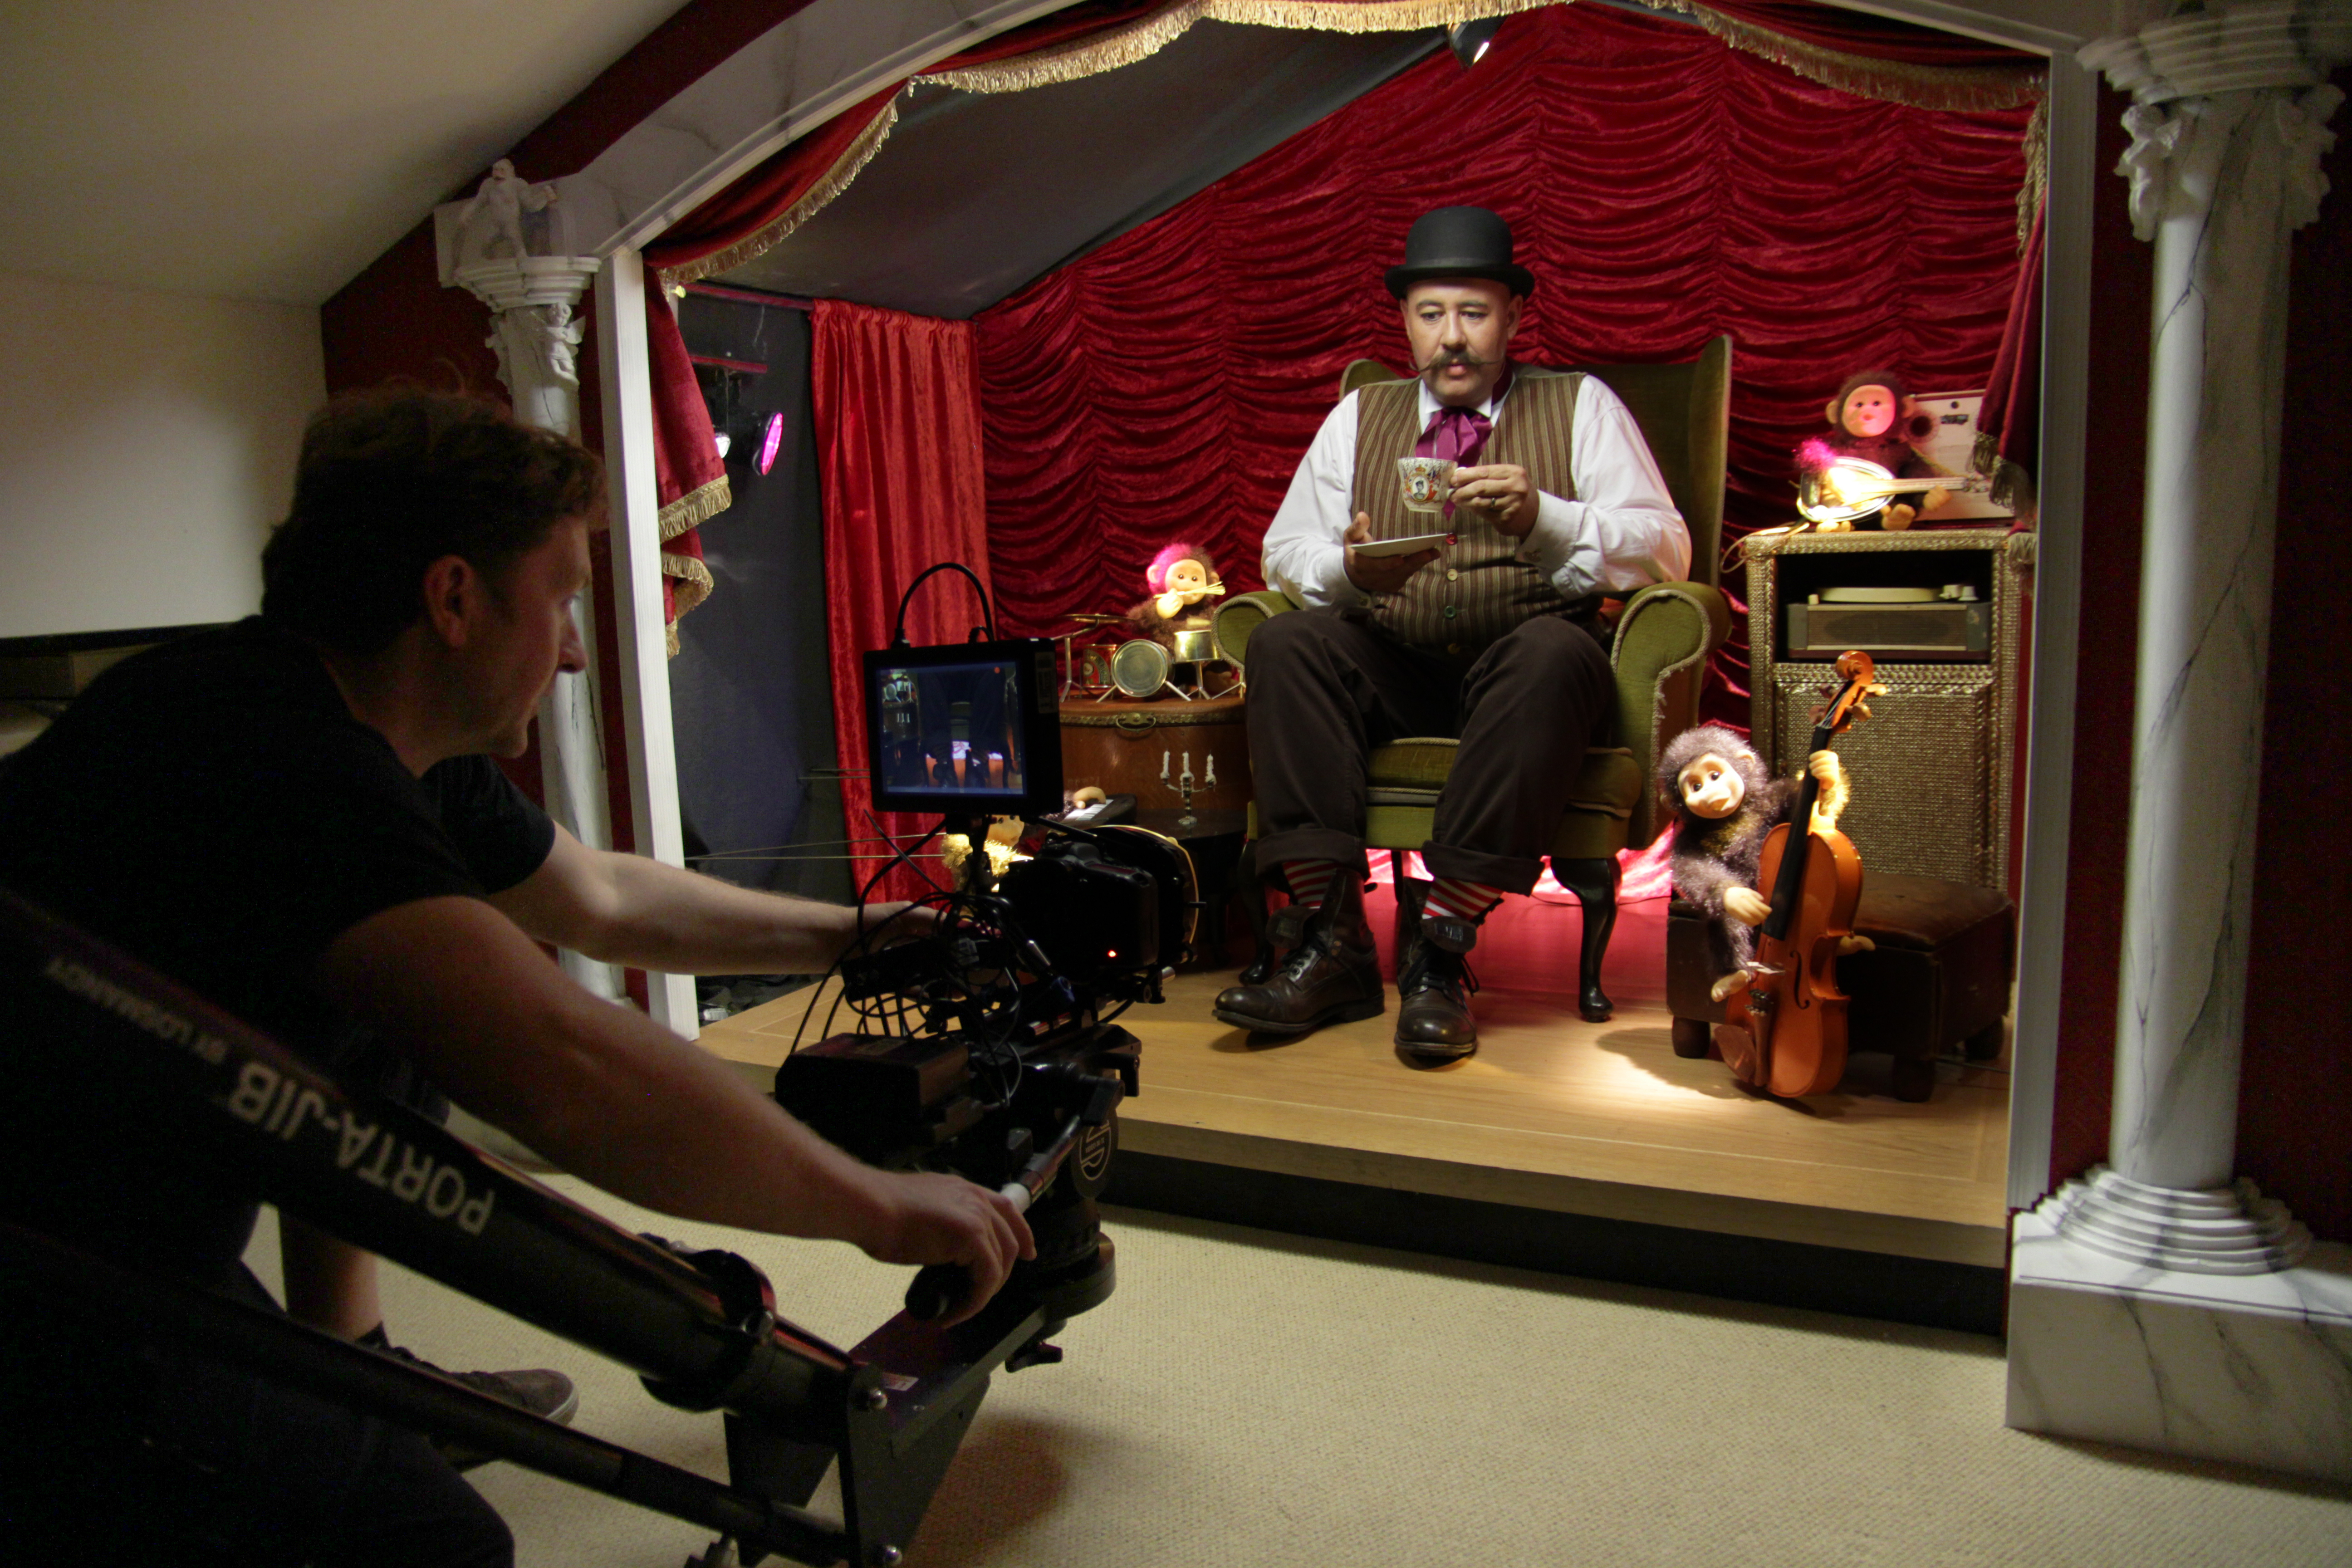 filming Dreamin music video with Mr Pickle aka Mike Stocks with jib.